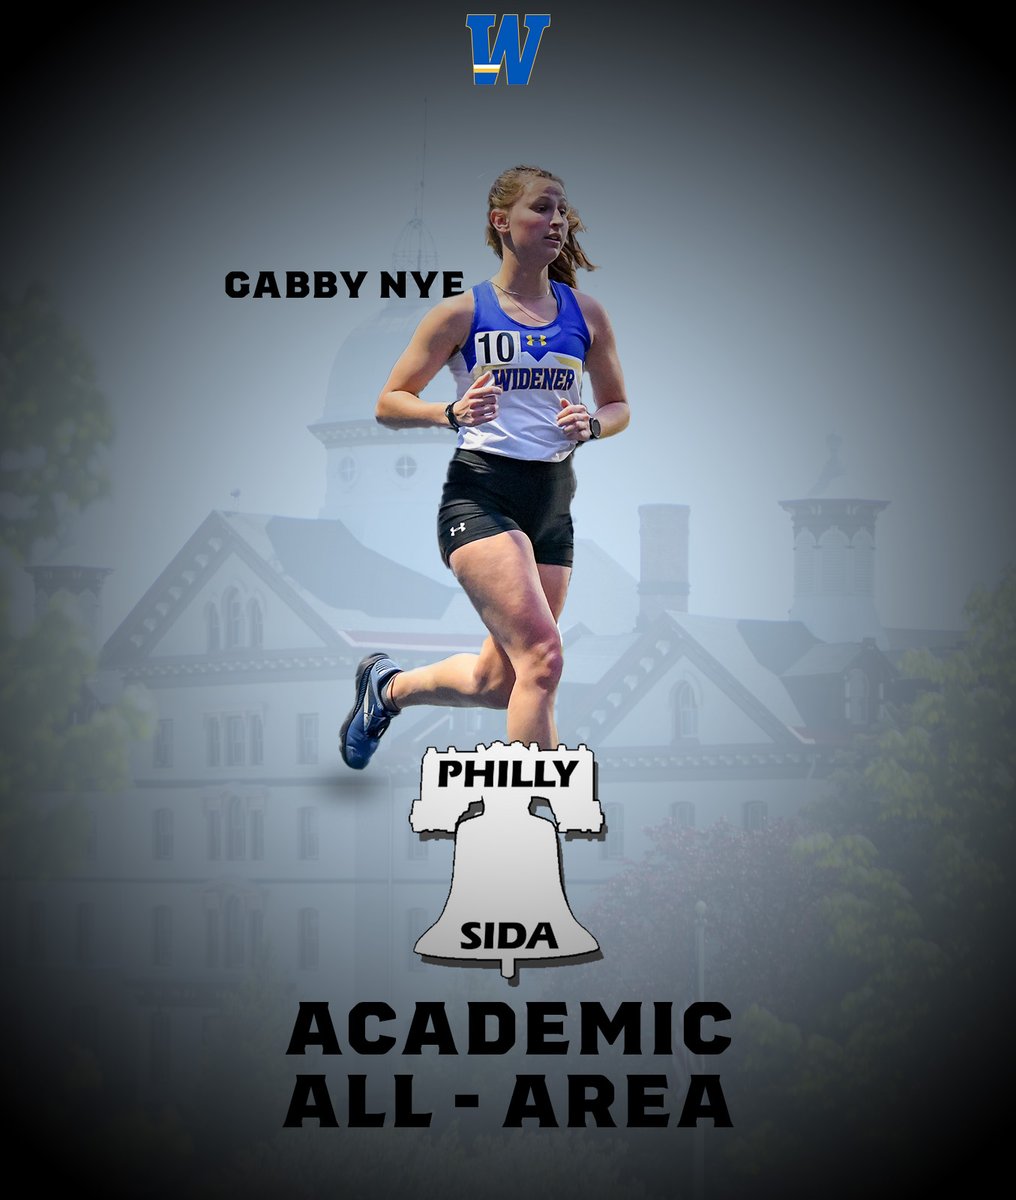 Another PhillySIDA Academic All-Area for Gabby Nye!! Congrats!!

#GoWidener #PlayWithPride